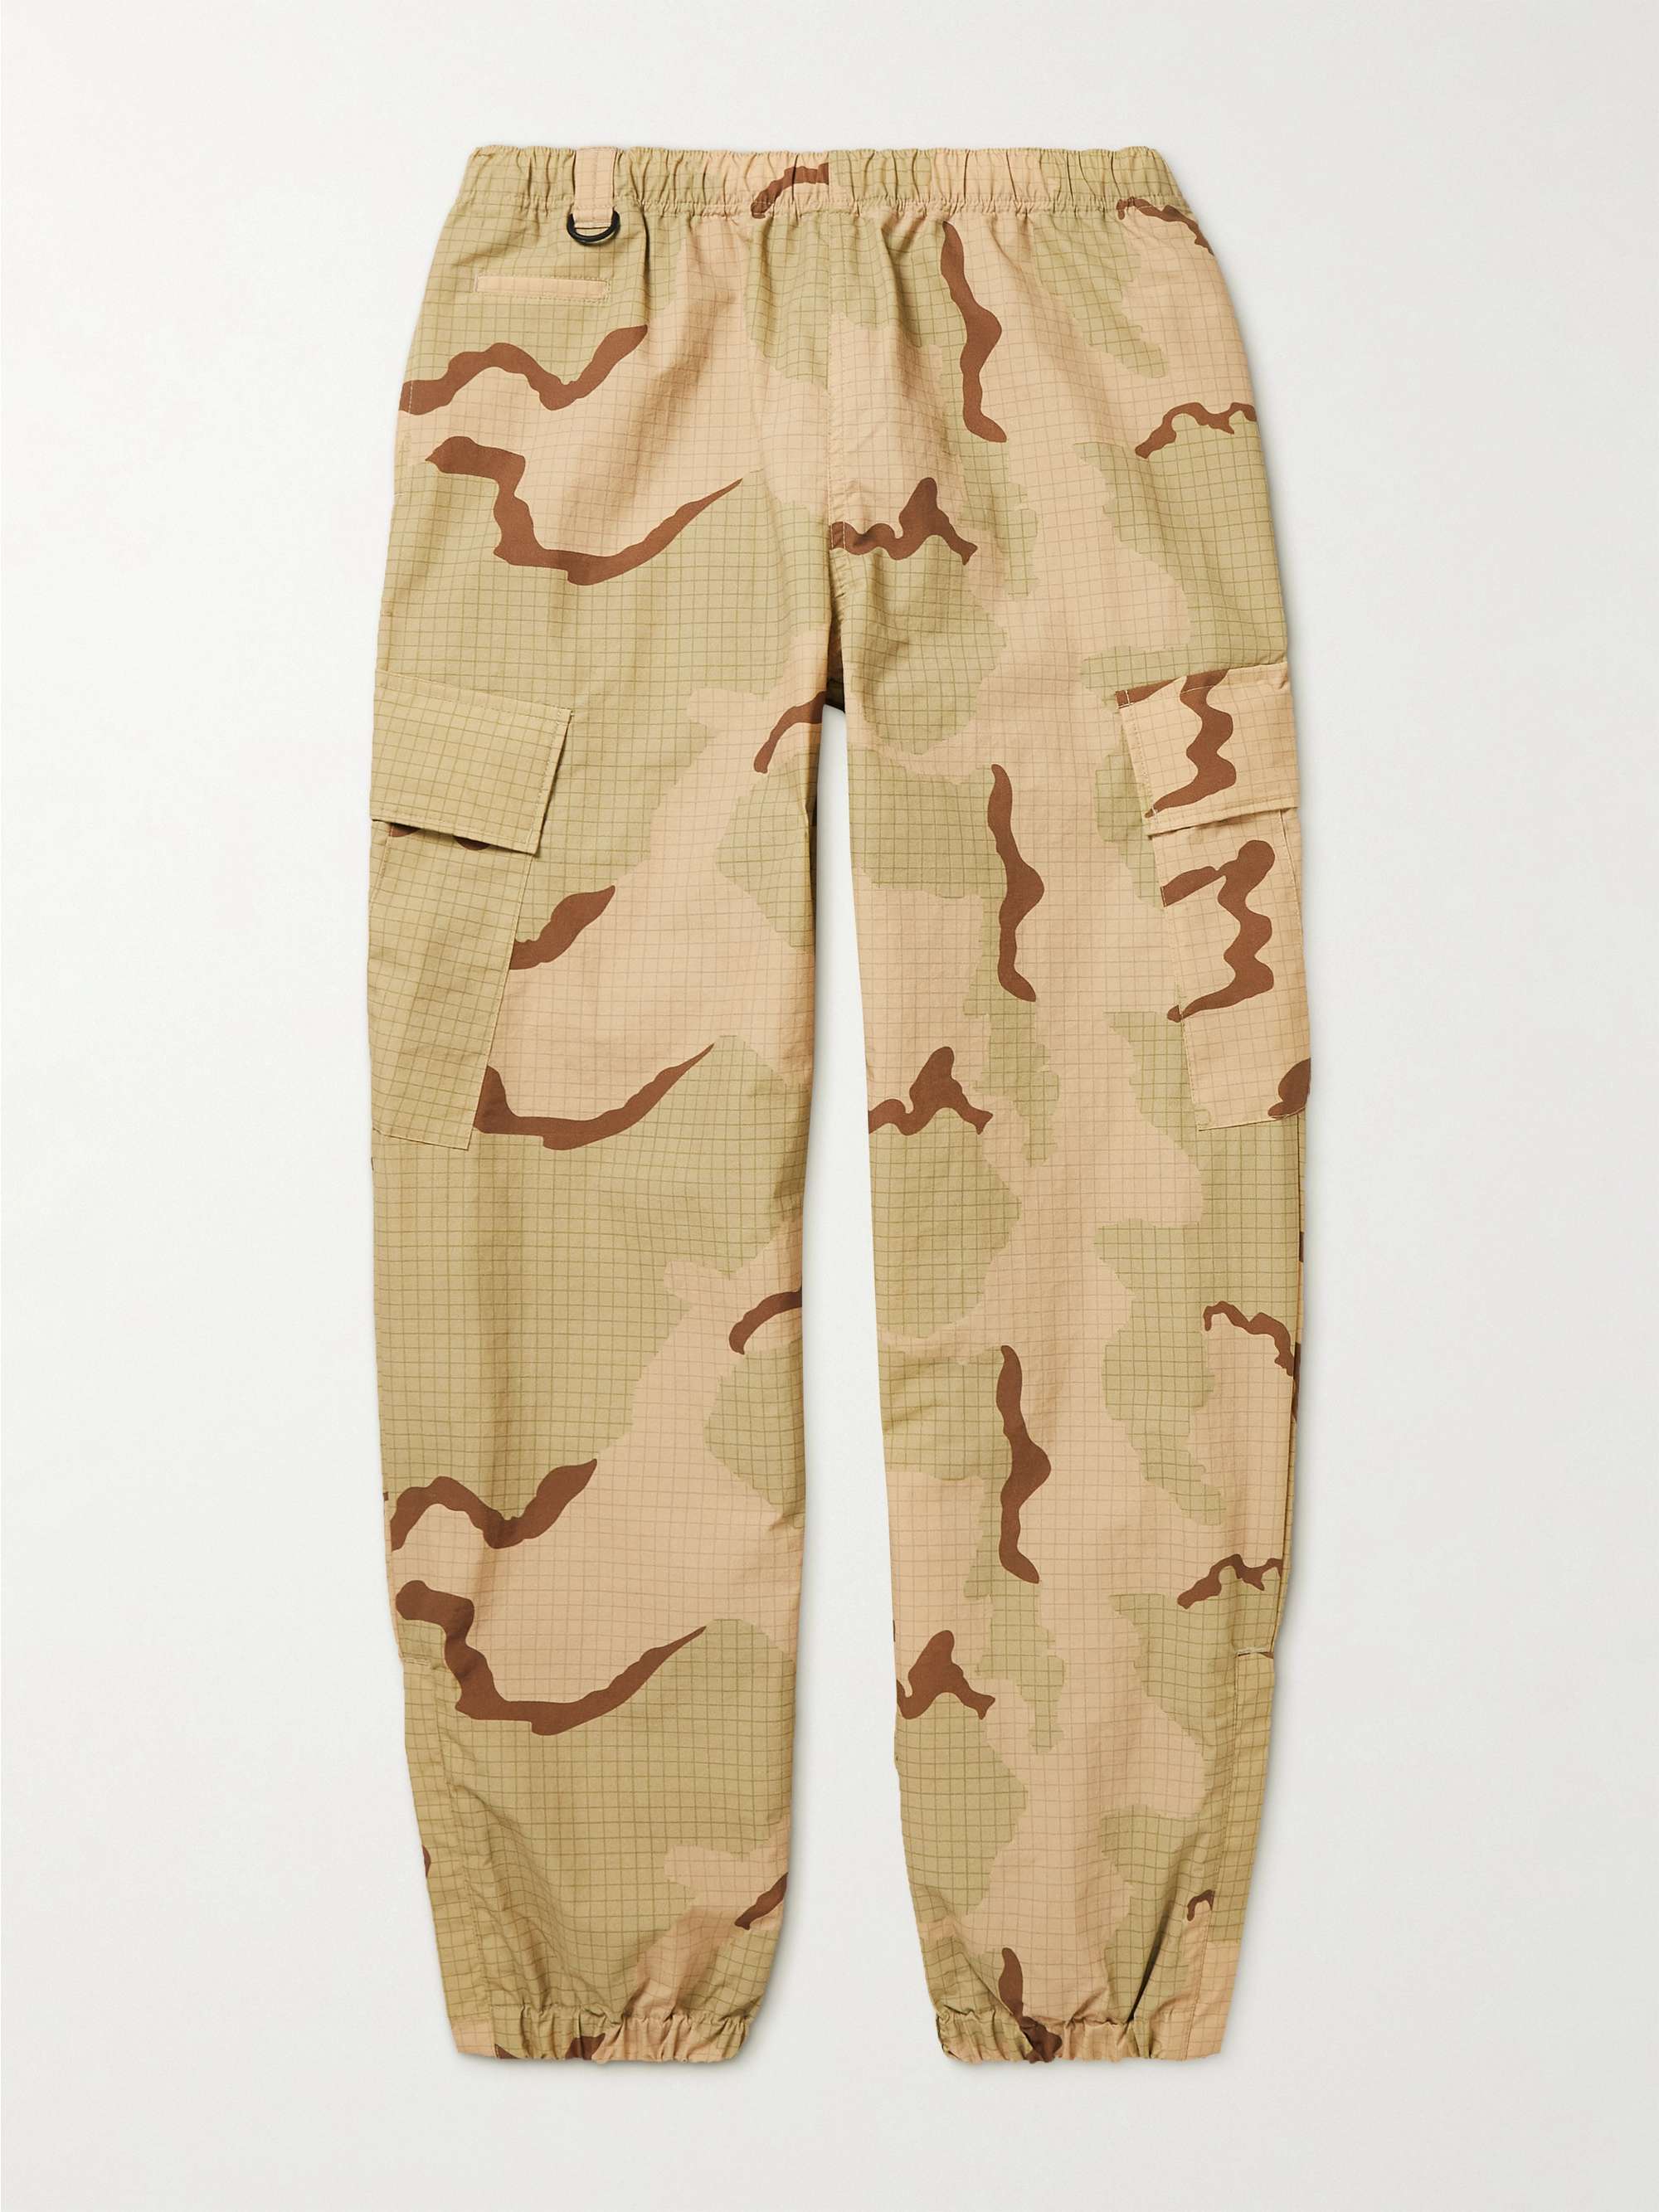 UNDERCOVER Slim-Fit Tapered Camouflage-Print Nylon-Ripstop Cargo Trousers  for Men